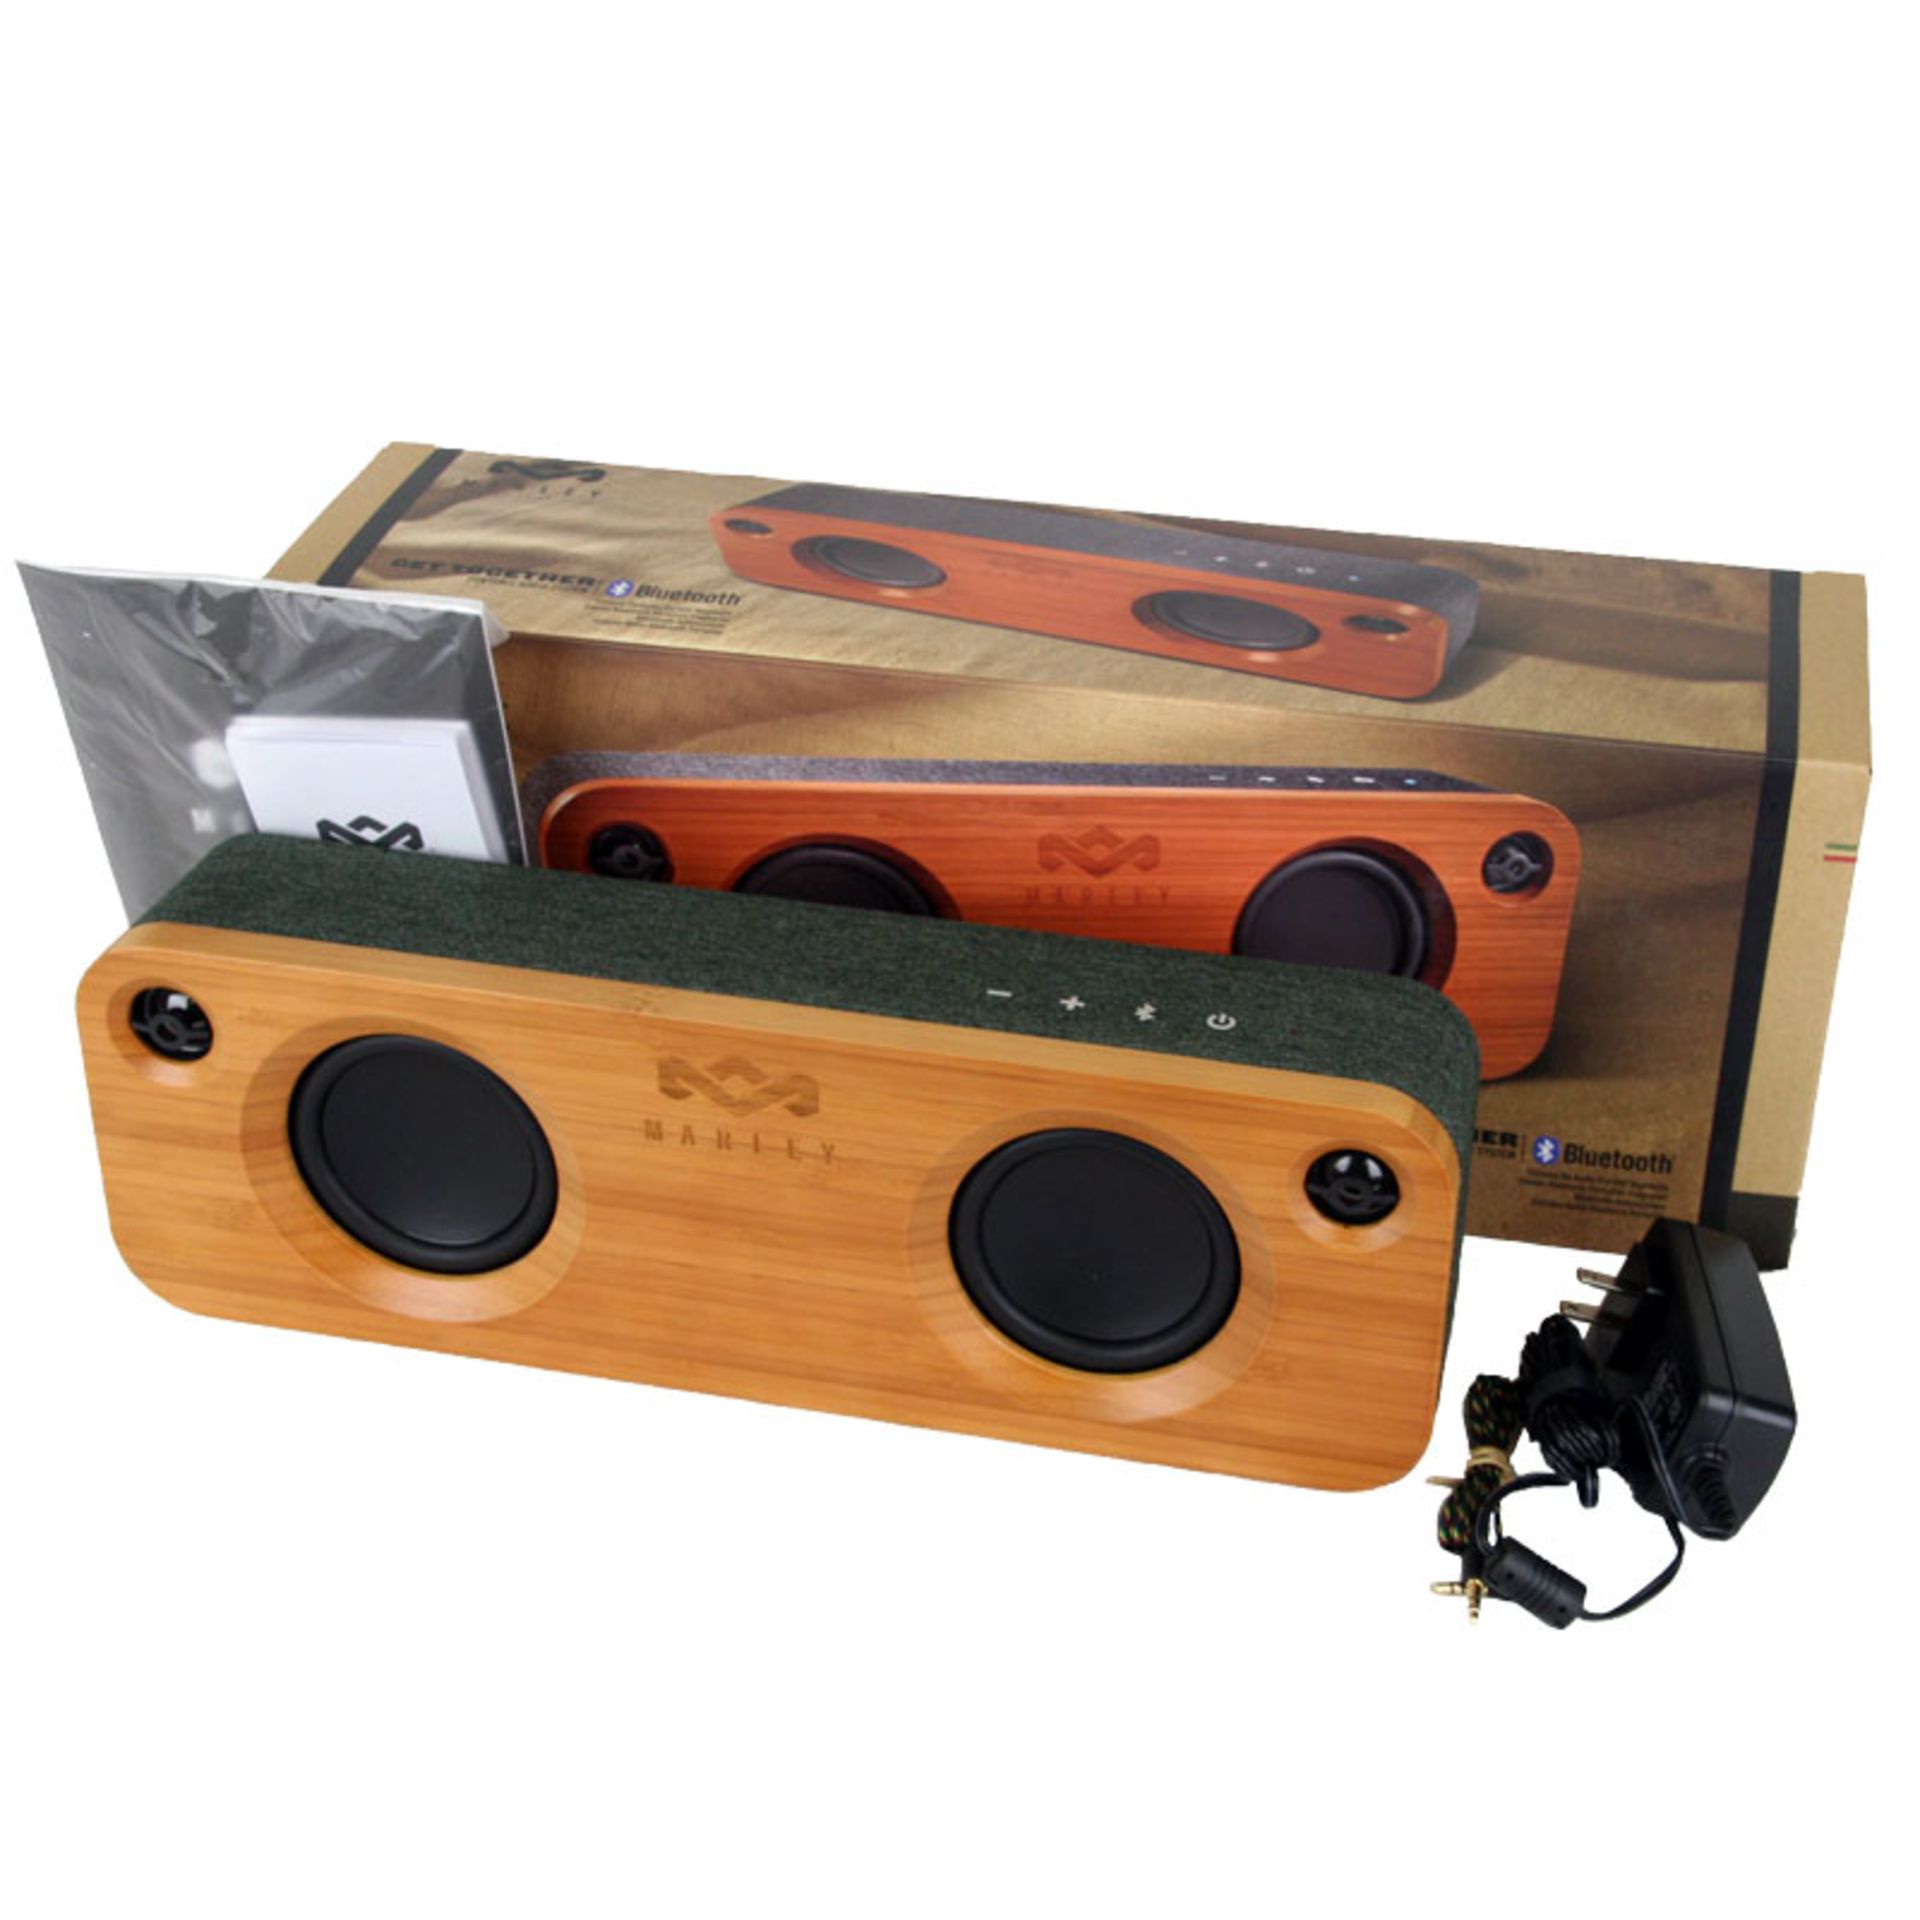 + VAT Grade A Marley Get It Together Portable Audio System - Bluetooth - 8 Hour Battery - Exclusive - Image 2 of 3